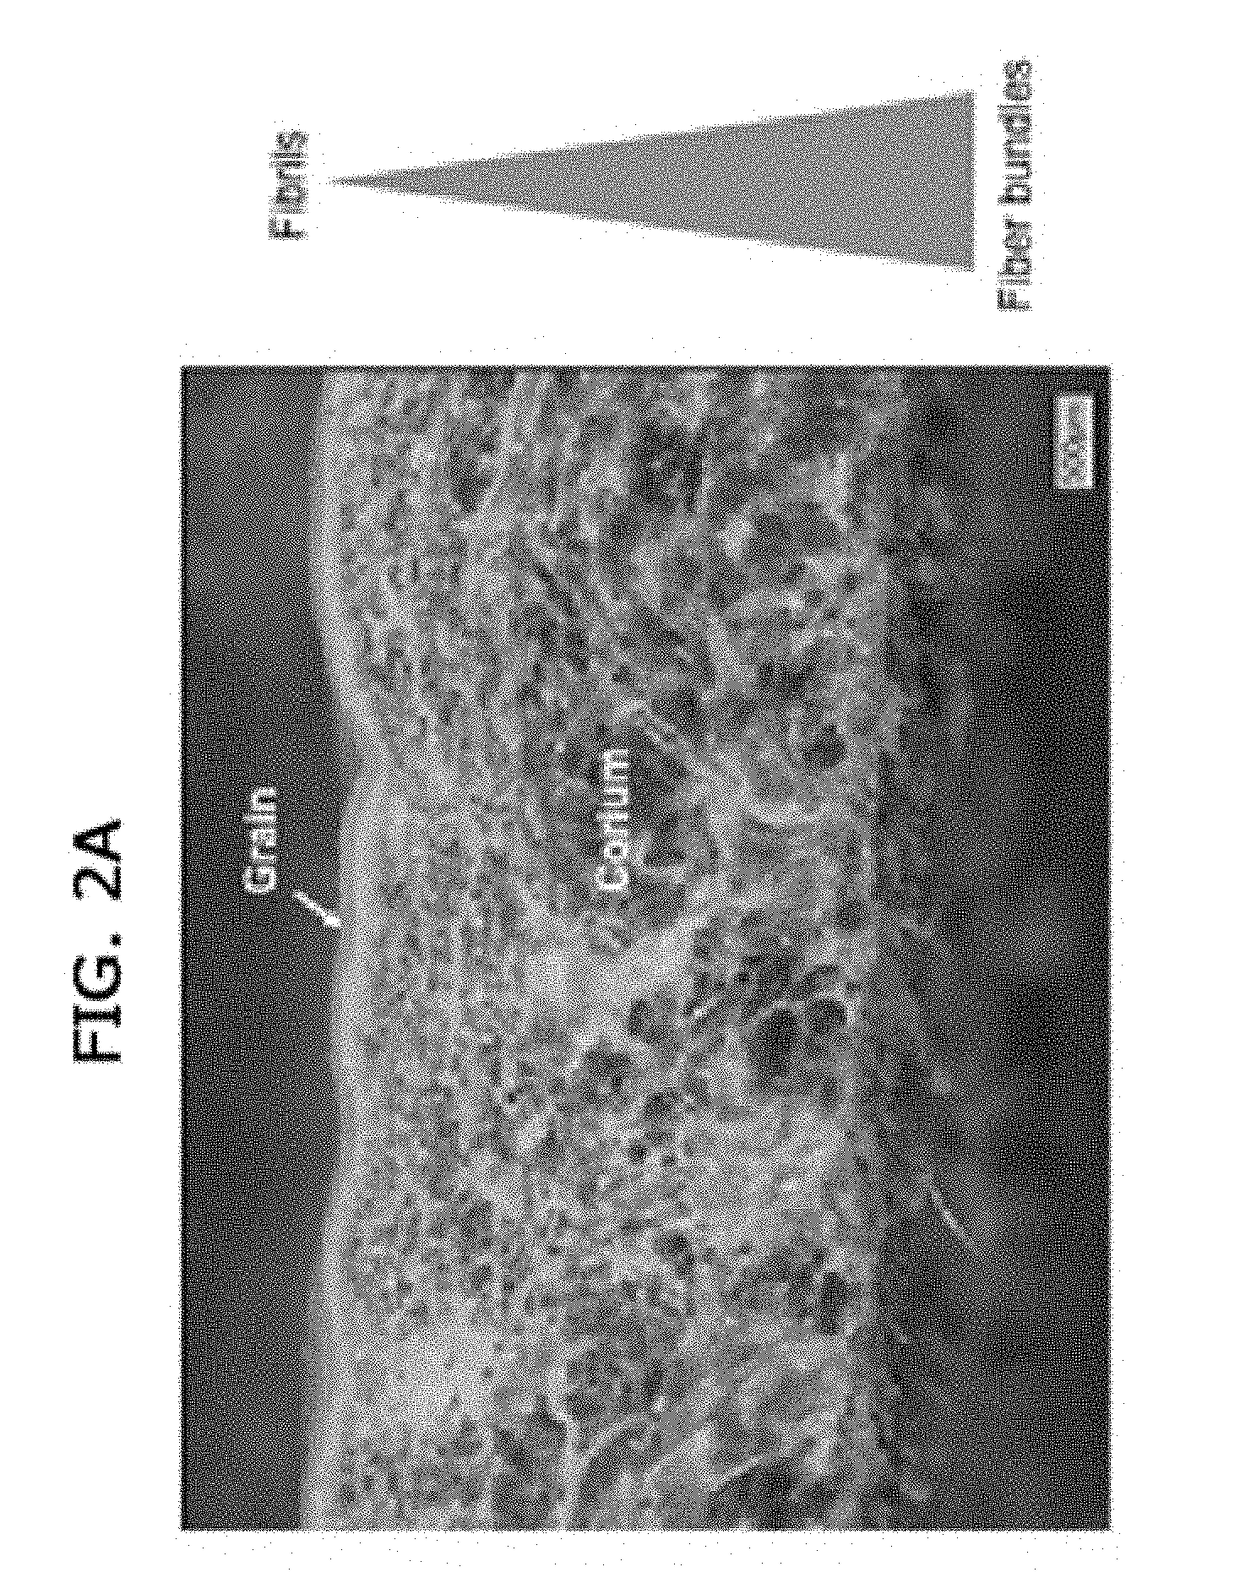 Method for making a biofabricated material containing collagen fibrils